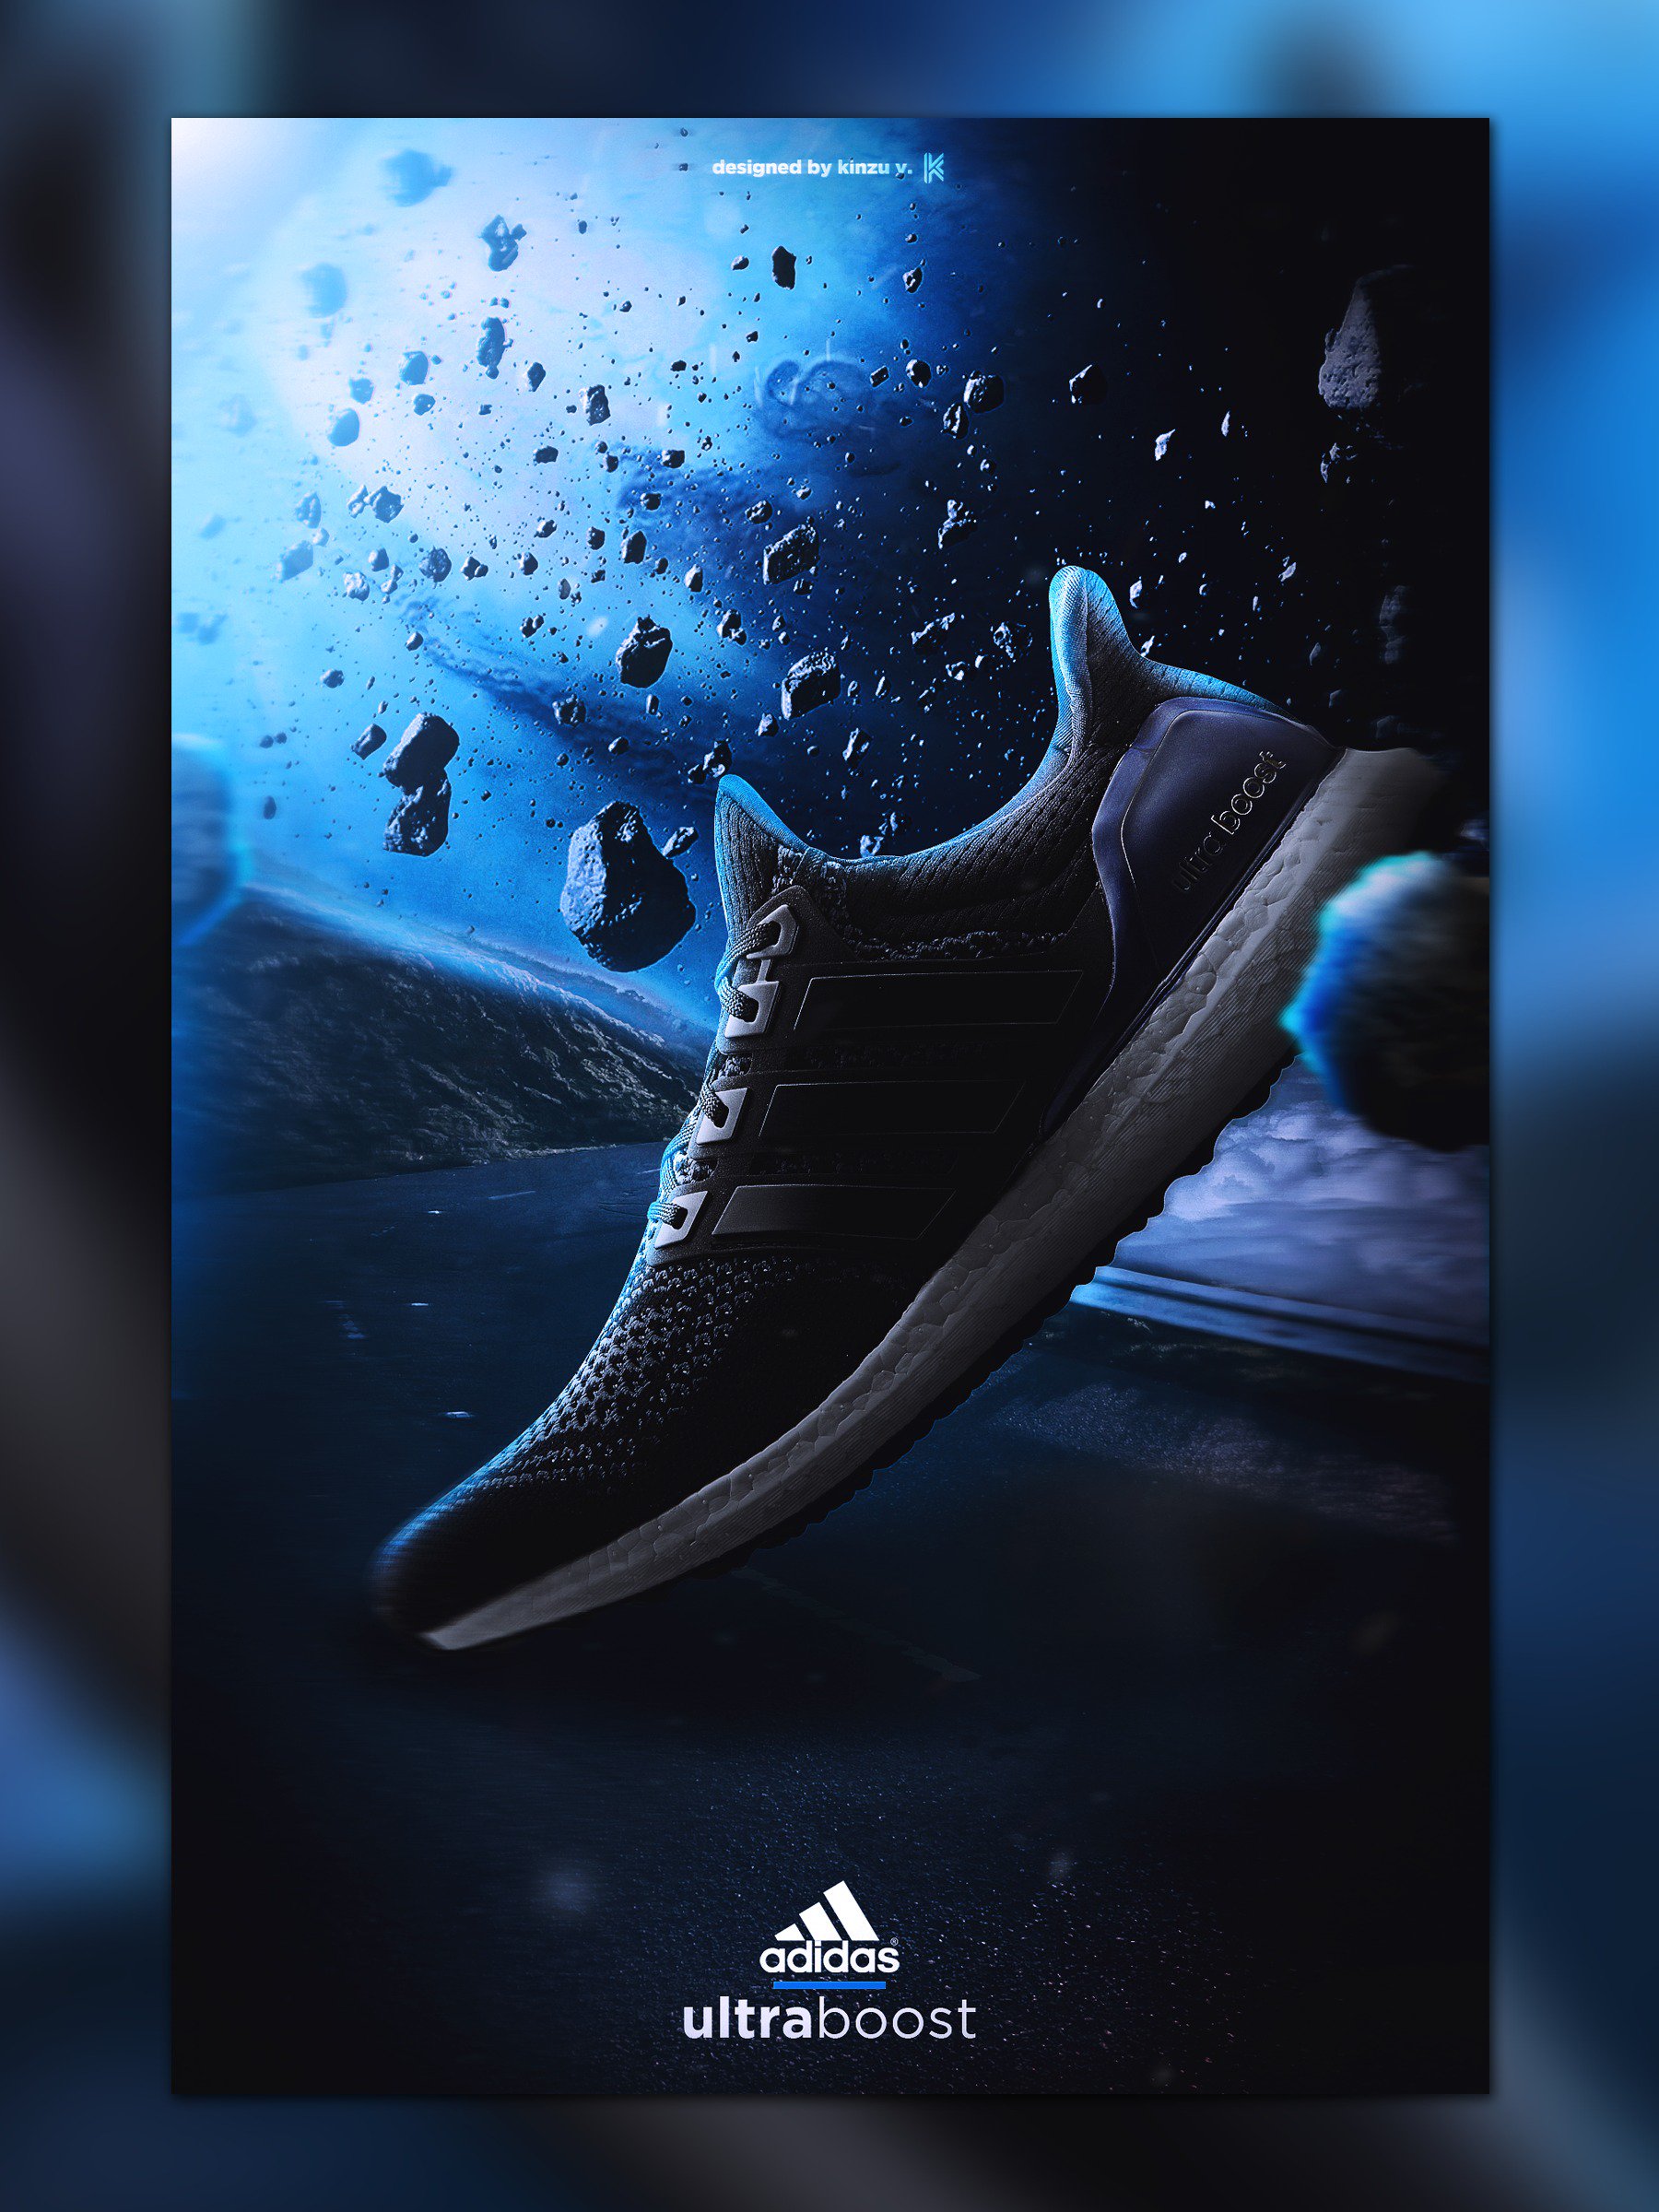 exagerar rima humedad KINZU YEO on Twitter: ".@adidas Ultra Boost Advertisement! Let me know what  you think! https://t.co/RbkgXlTEiV" / Twitter